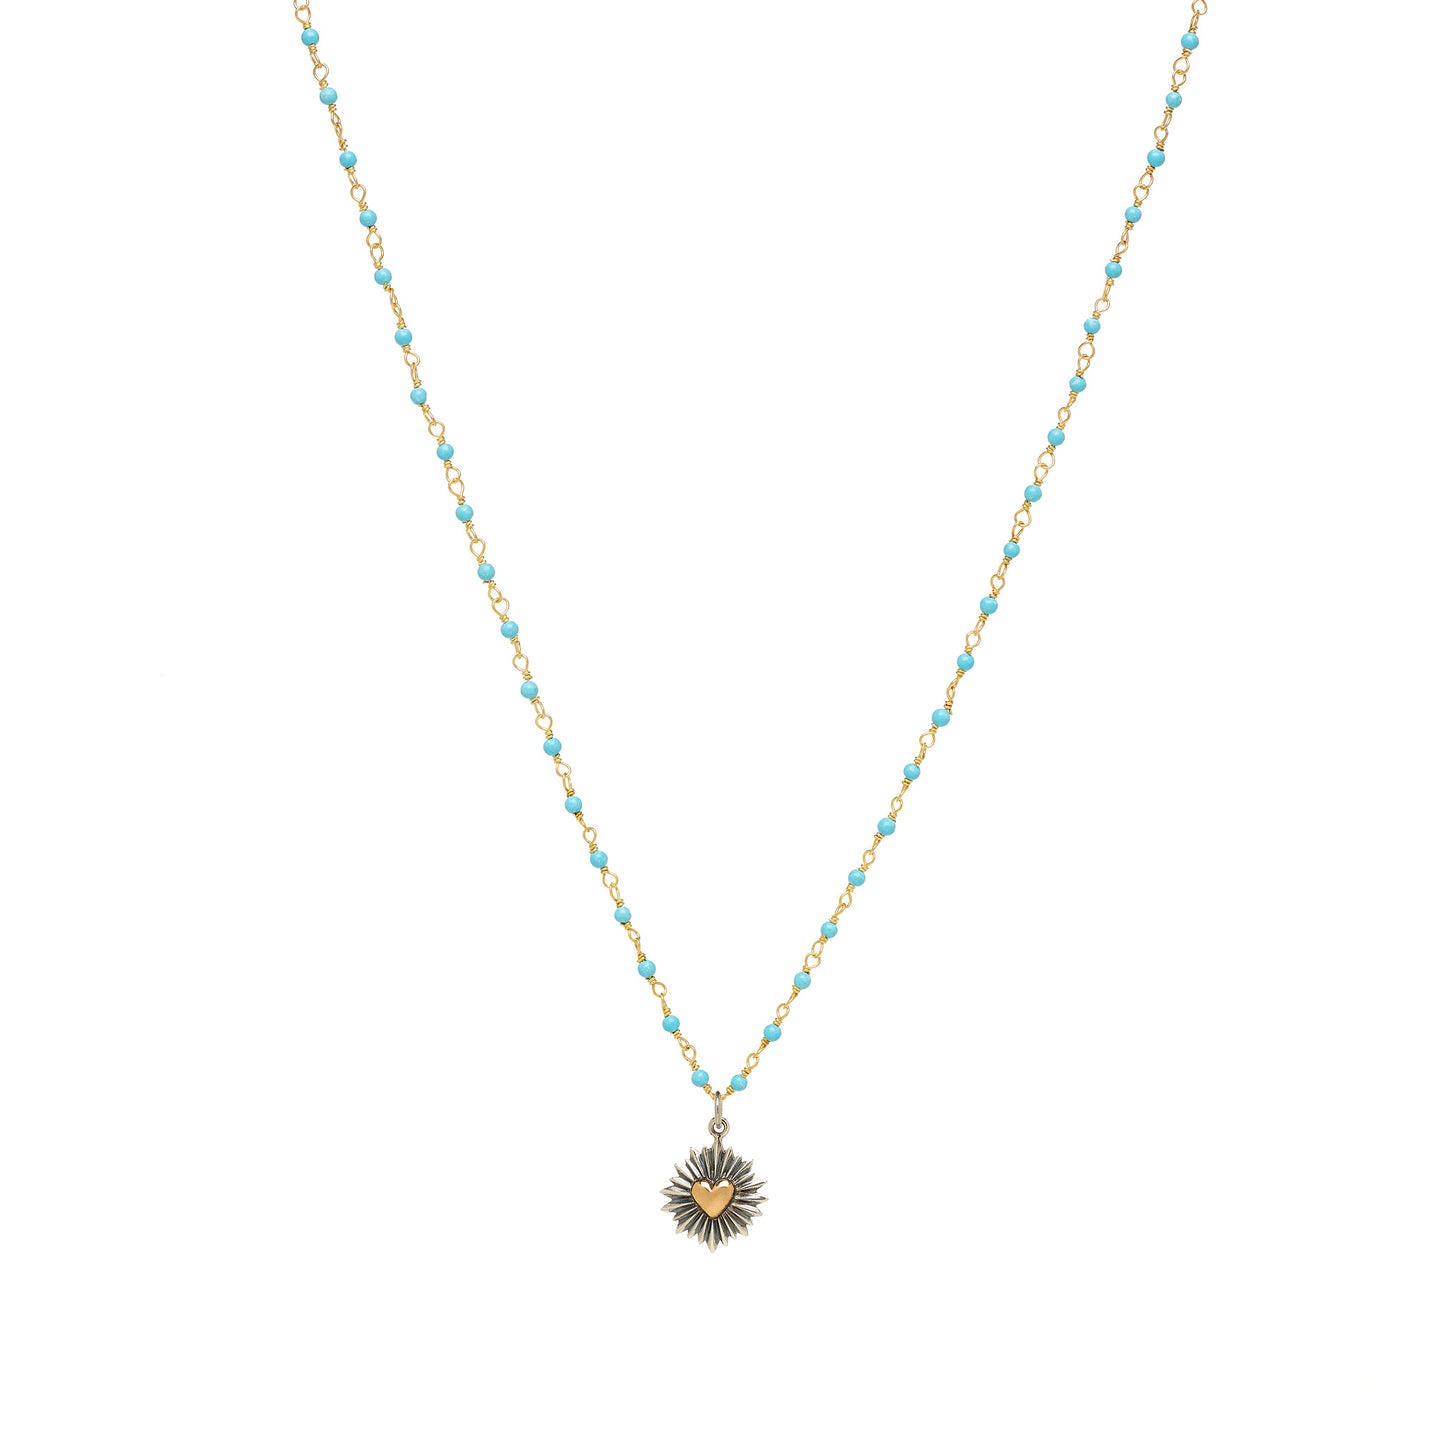 Kingman Turquoise Necklace with Heart Burst Charm